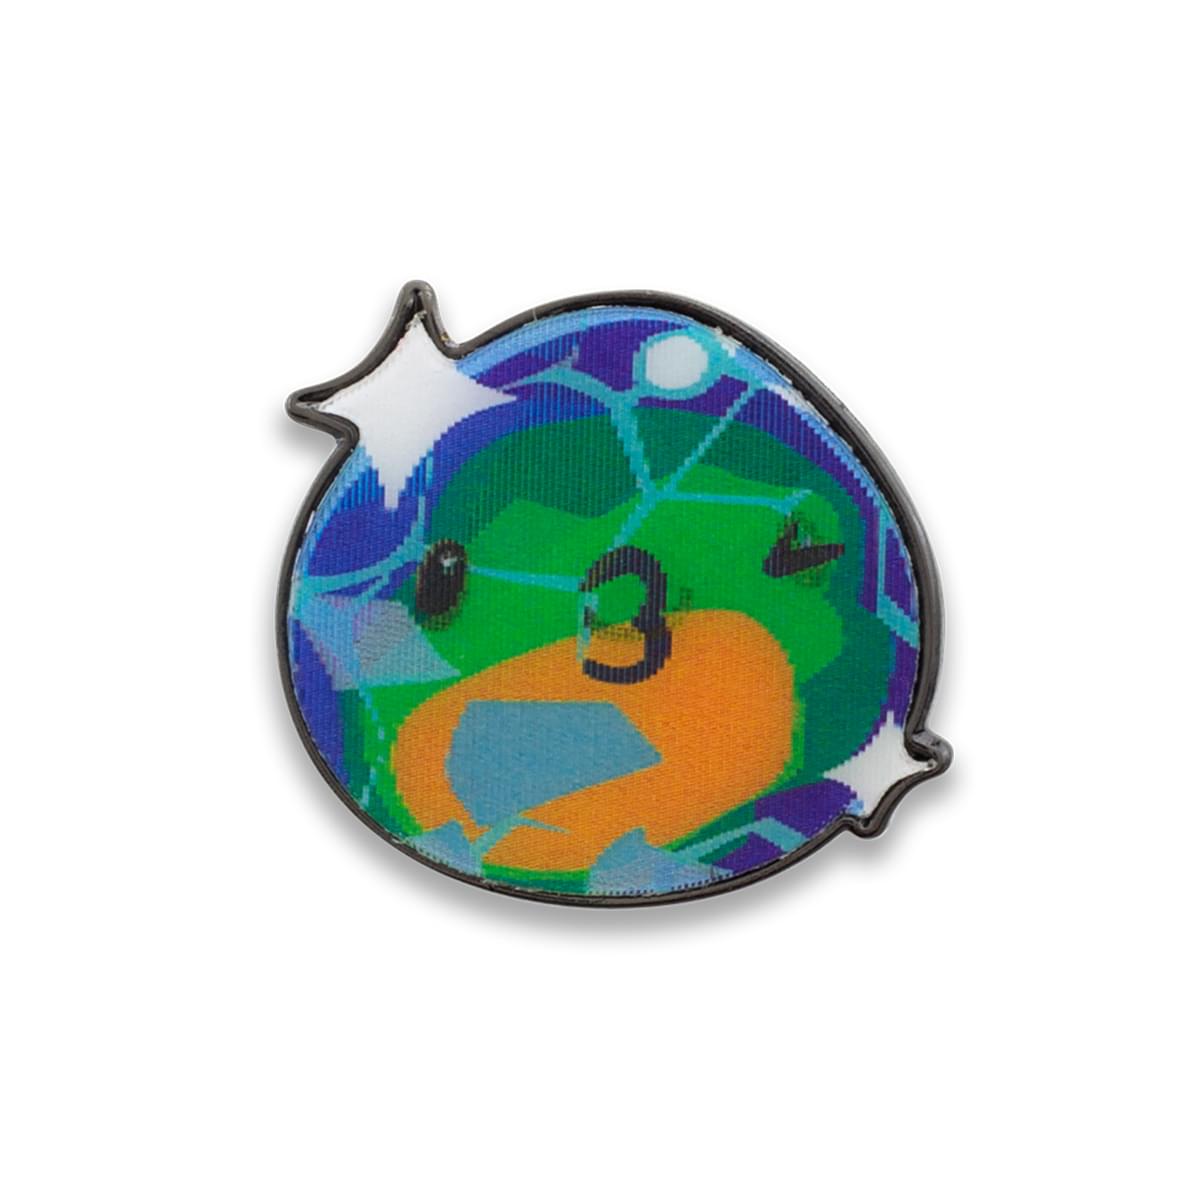 Slime Rancher 1 Inch Lenticular Collector Pin | Mosaic Slime